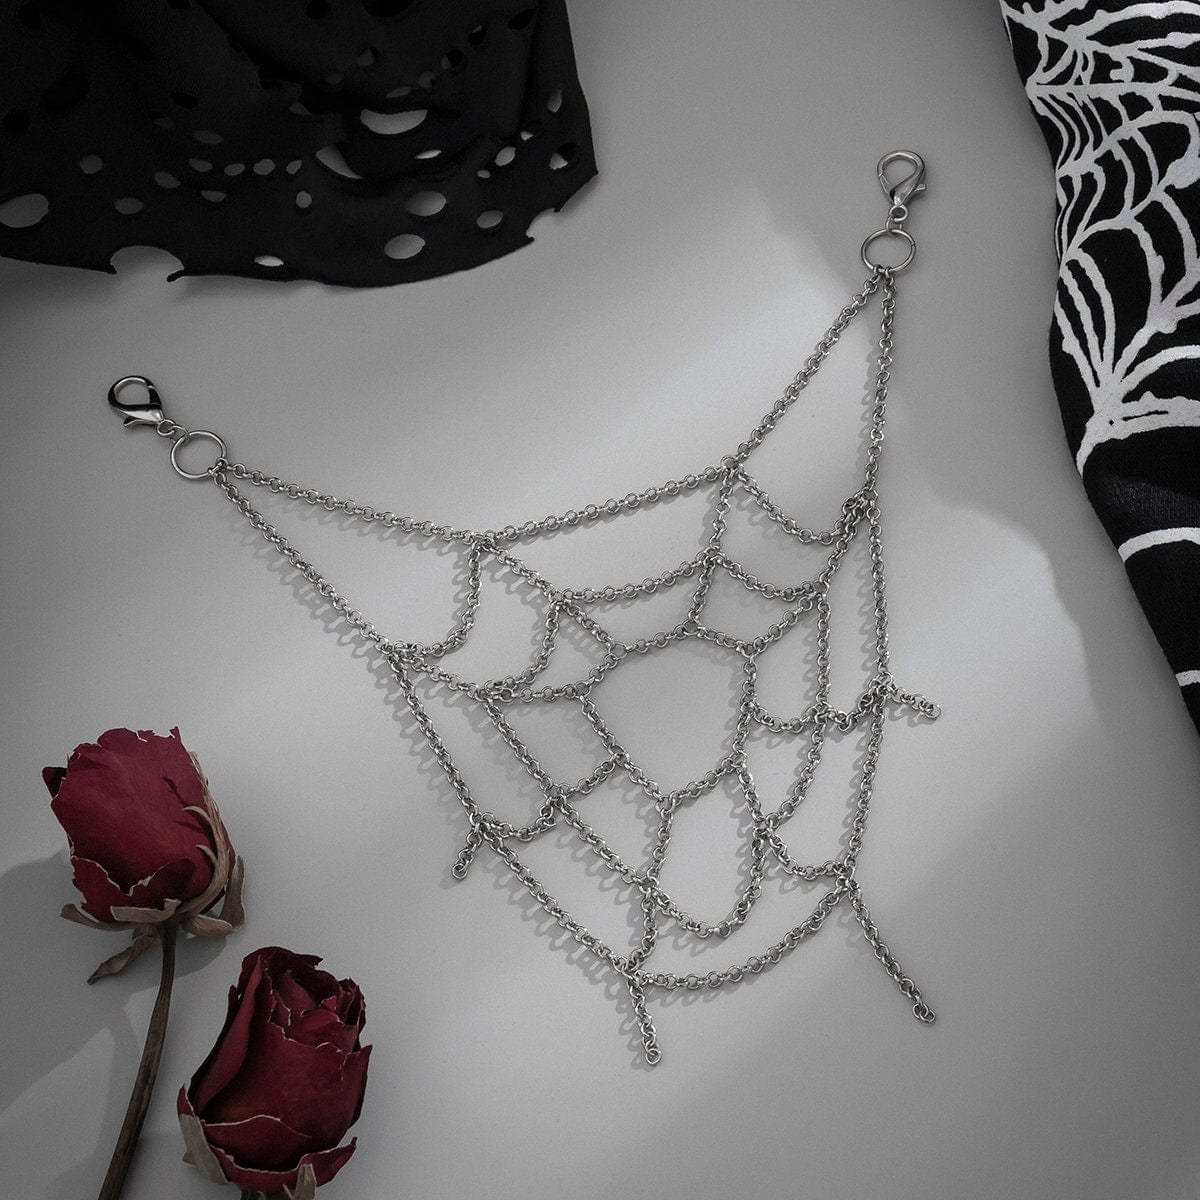 Chic Hollowed-Out Cobweb Necklace Chain Bra Set